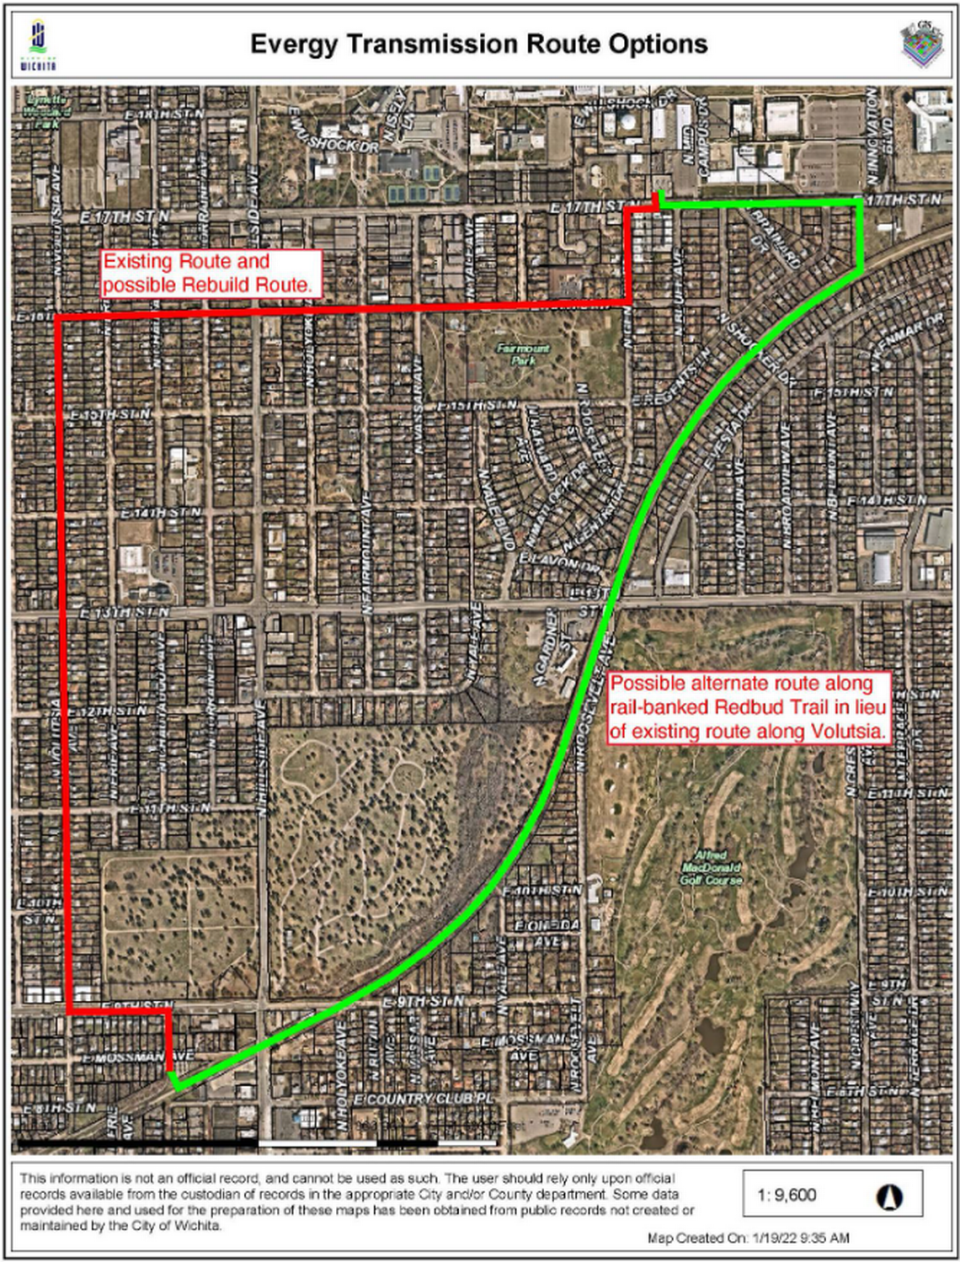 These are the two options Evergy presented northeast Wichita residents with for replacing the aging transmission line between the Wichita State substation and the Mossman substation near 9th and Hillside.